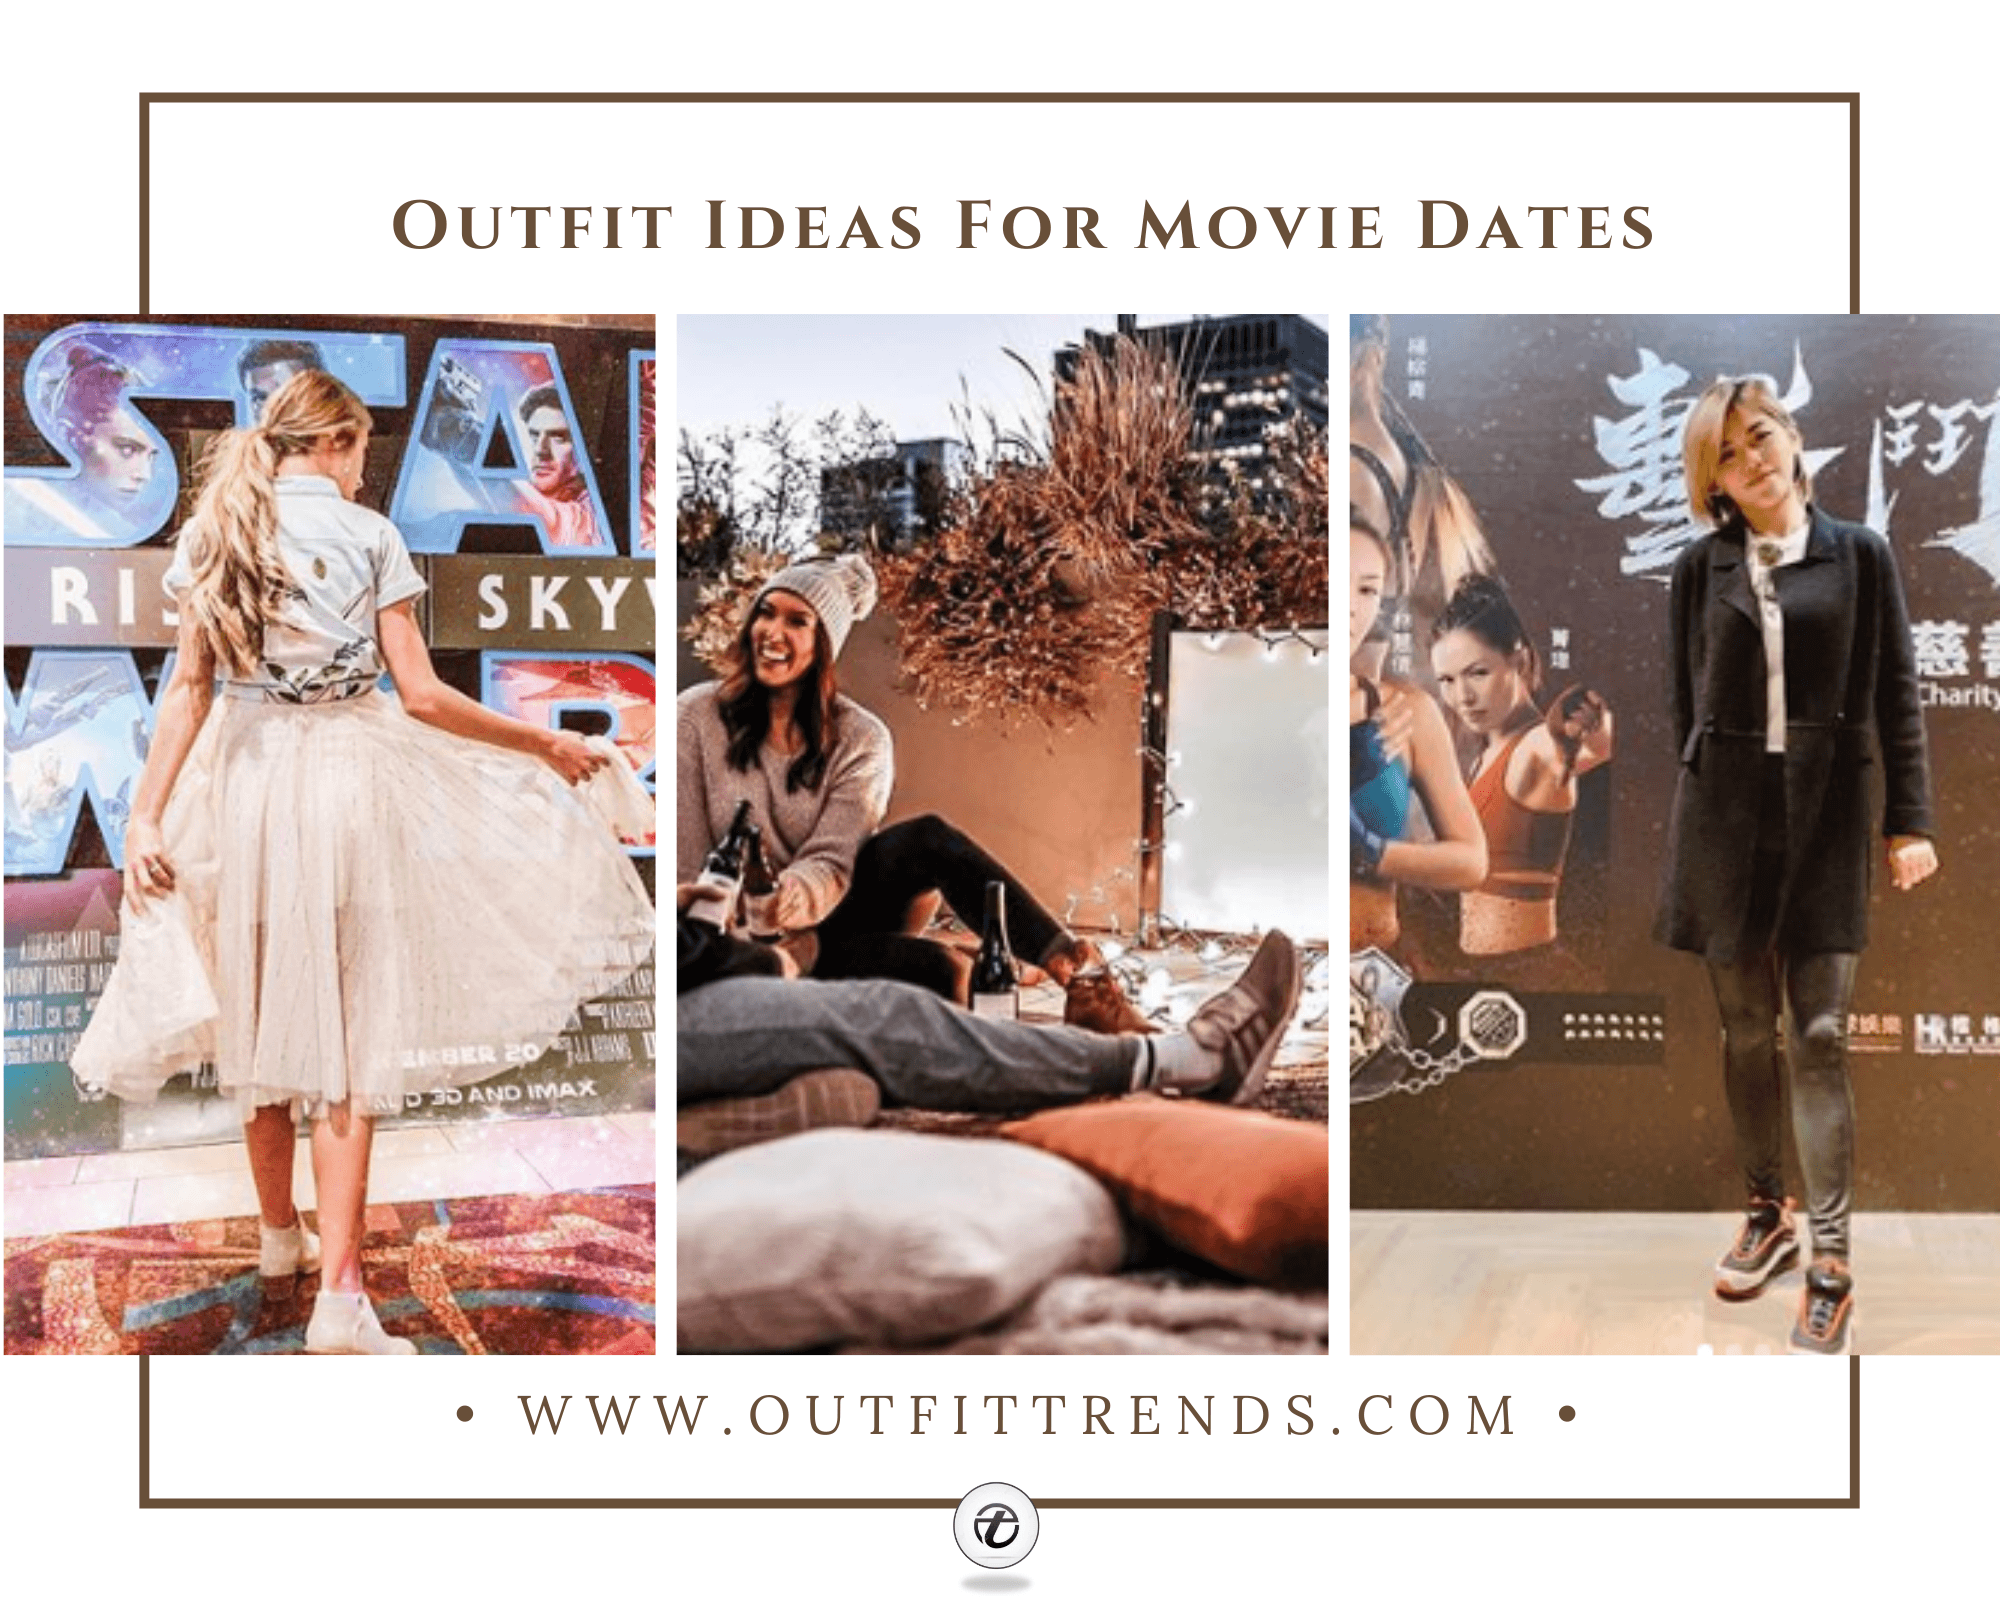 Movie Date Outfits - 21 Ideas on What to Wear to a Movie Date